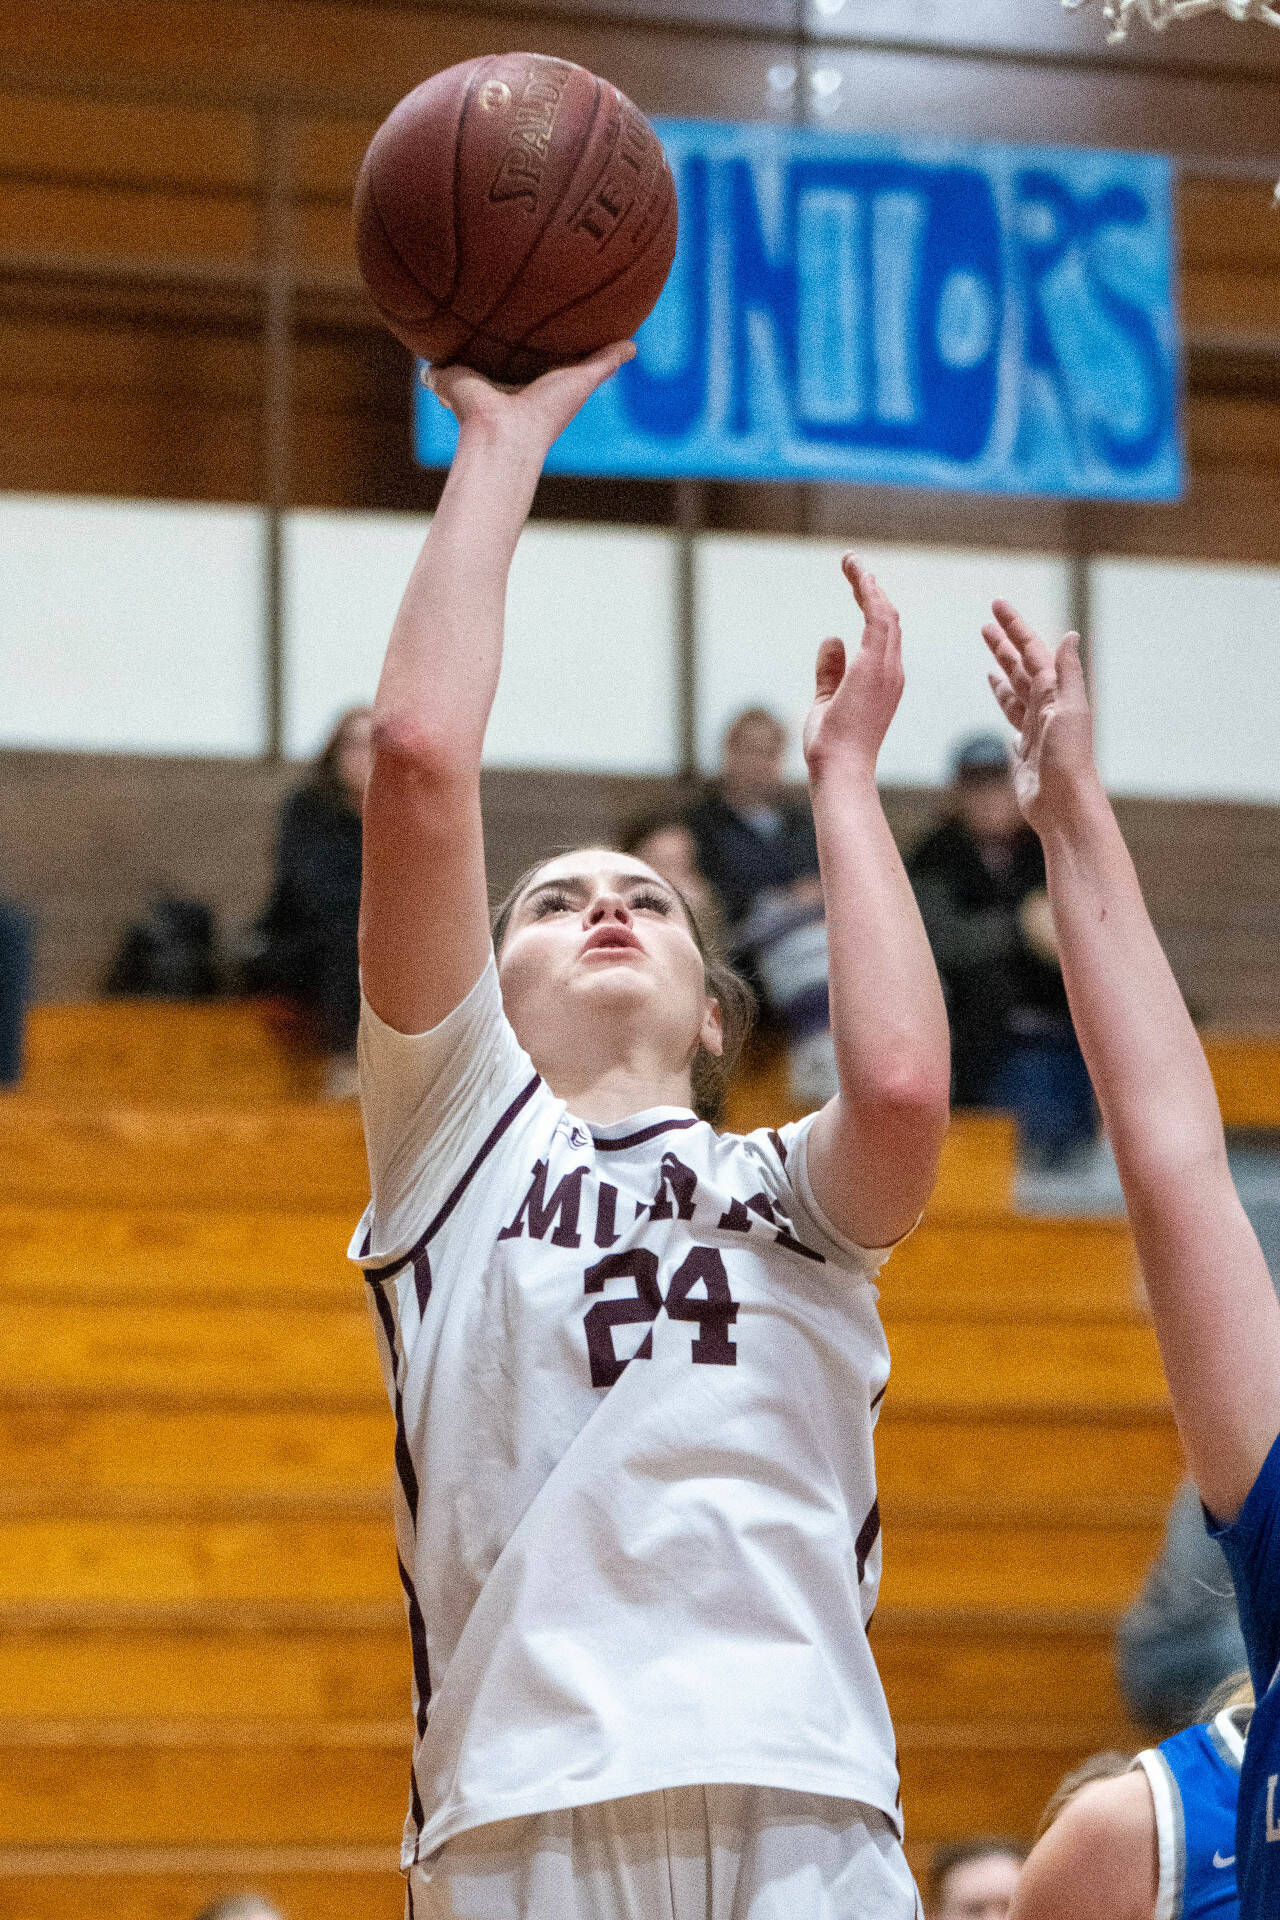 PHOTO BY FOREST WORGUM Montesano’s Jillie Dalan, seen here in a file photo, scored 27 points to lead the Bulldogs to a 54-33 win over Aberdeen in the title game of the Montesano Winter Classic on Friday in Montesano.